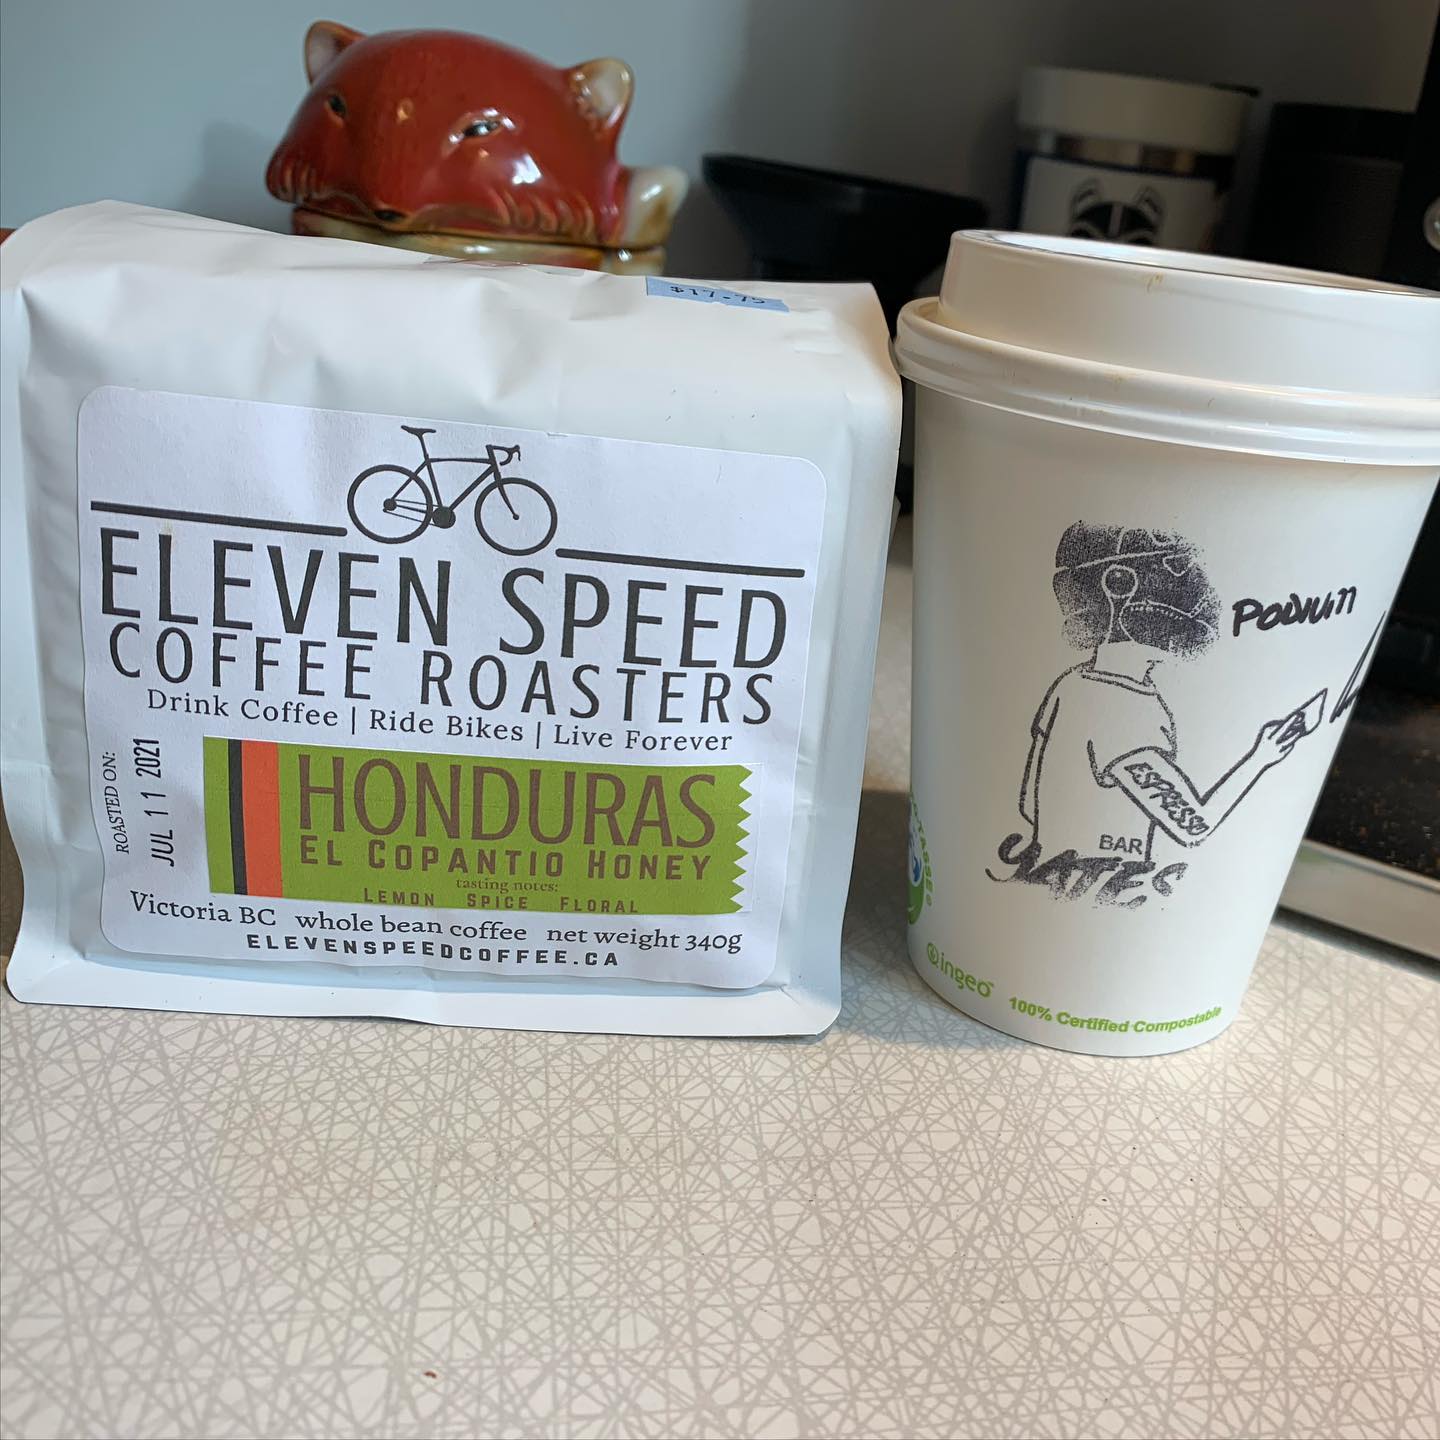 Two bridge crossings in two days. Who could have imagined it? Today’s was a mission to get some more @elevenspeedcoffee from @dolcevitayates #coffee #yyjcoffee #local #localbusiness